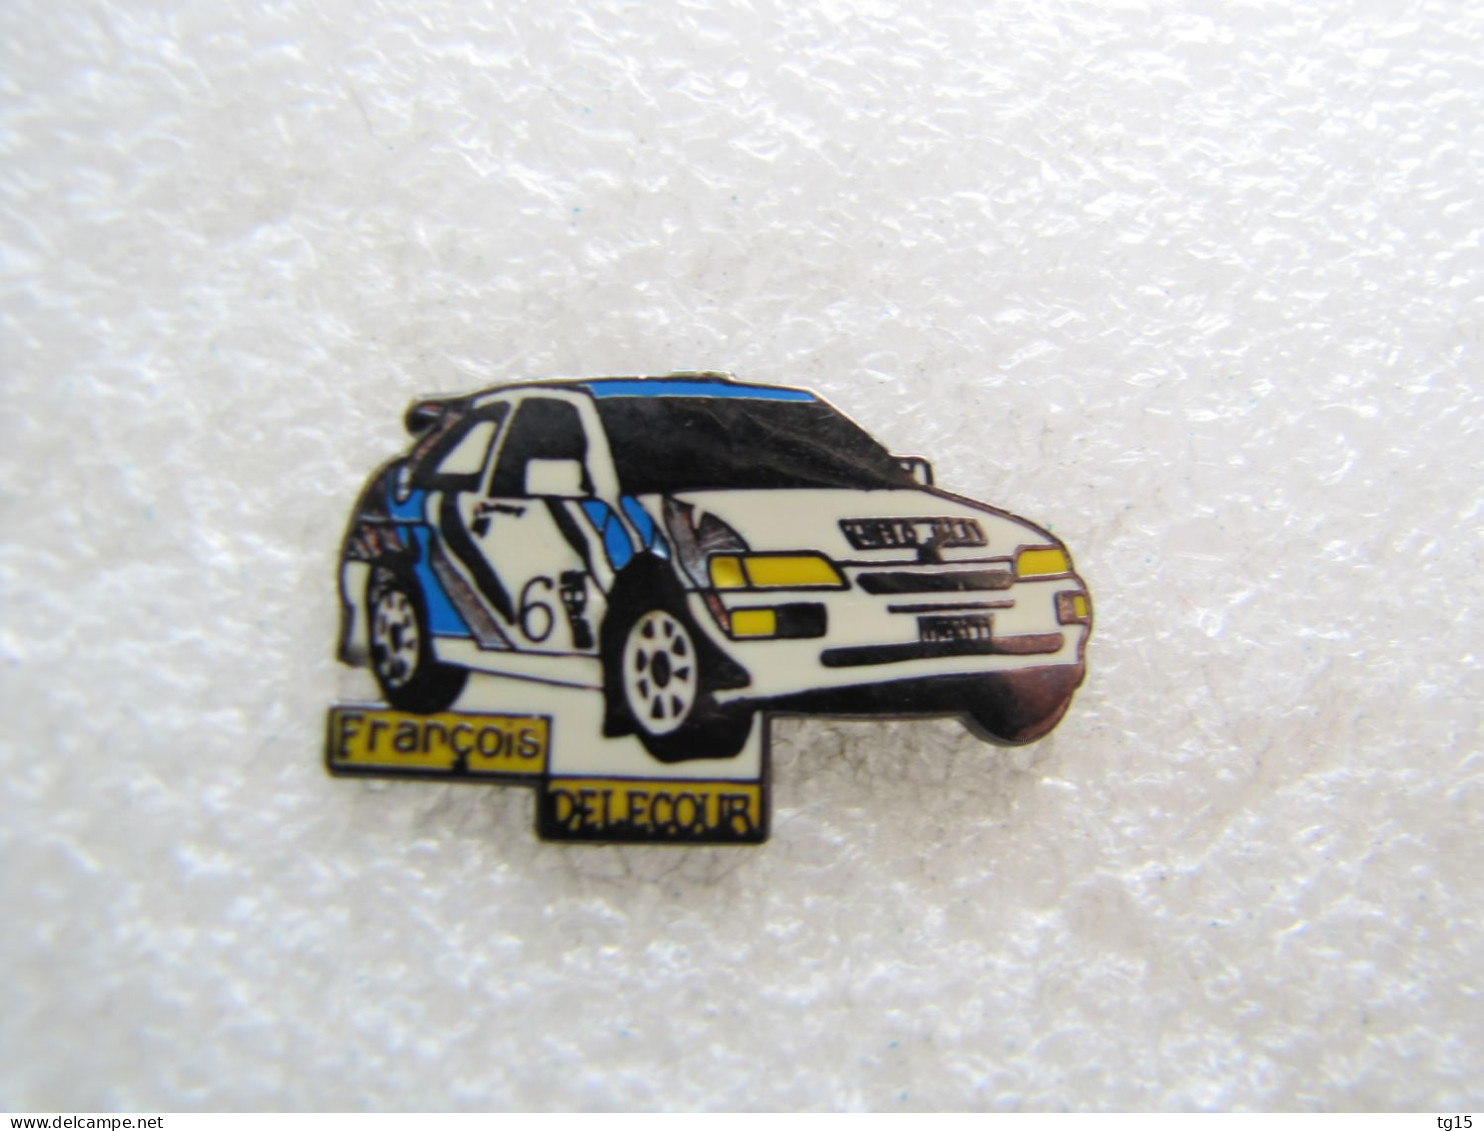 RARE  PIN'S     FORD   ESCORT  COSWORTH   FRANCOIS DELECOUR  RALLYE    Email  De Synthèse - Ford